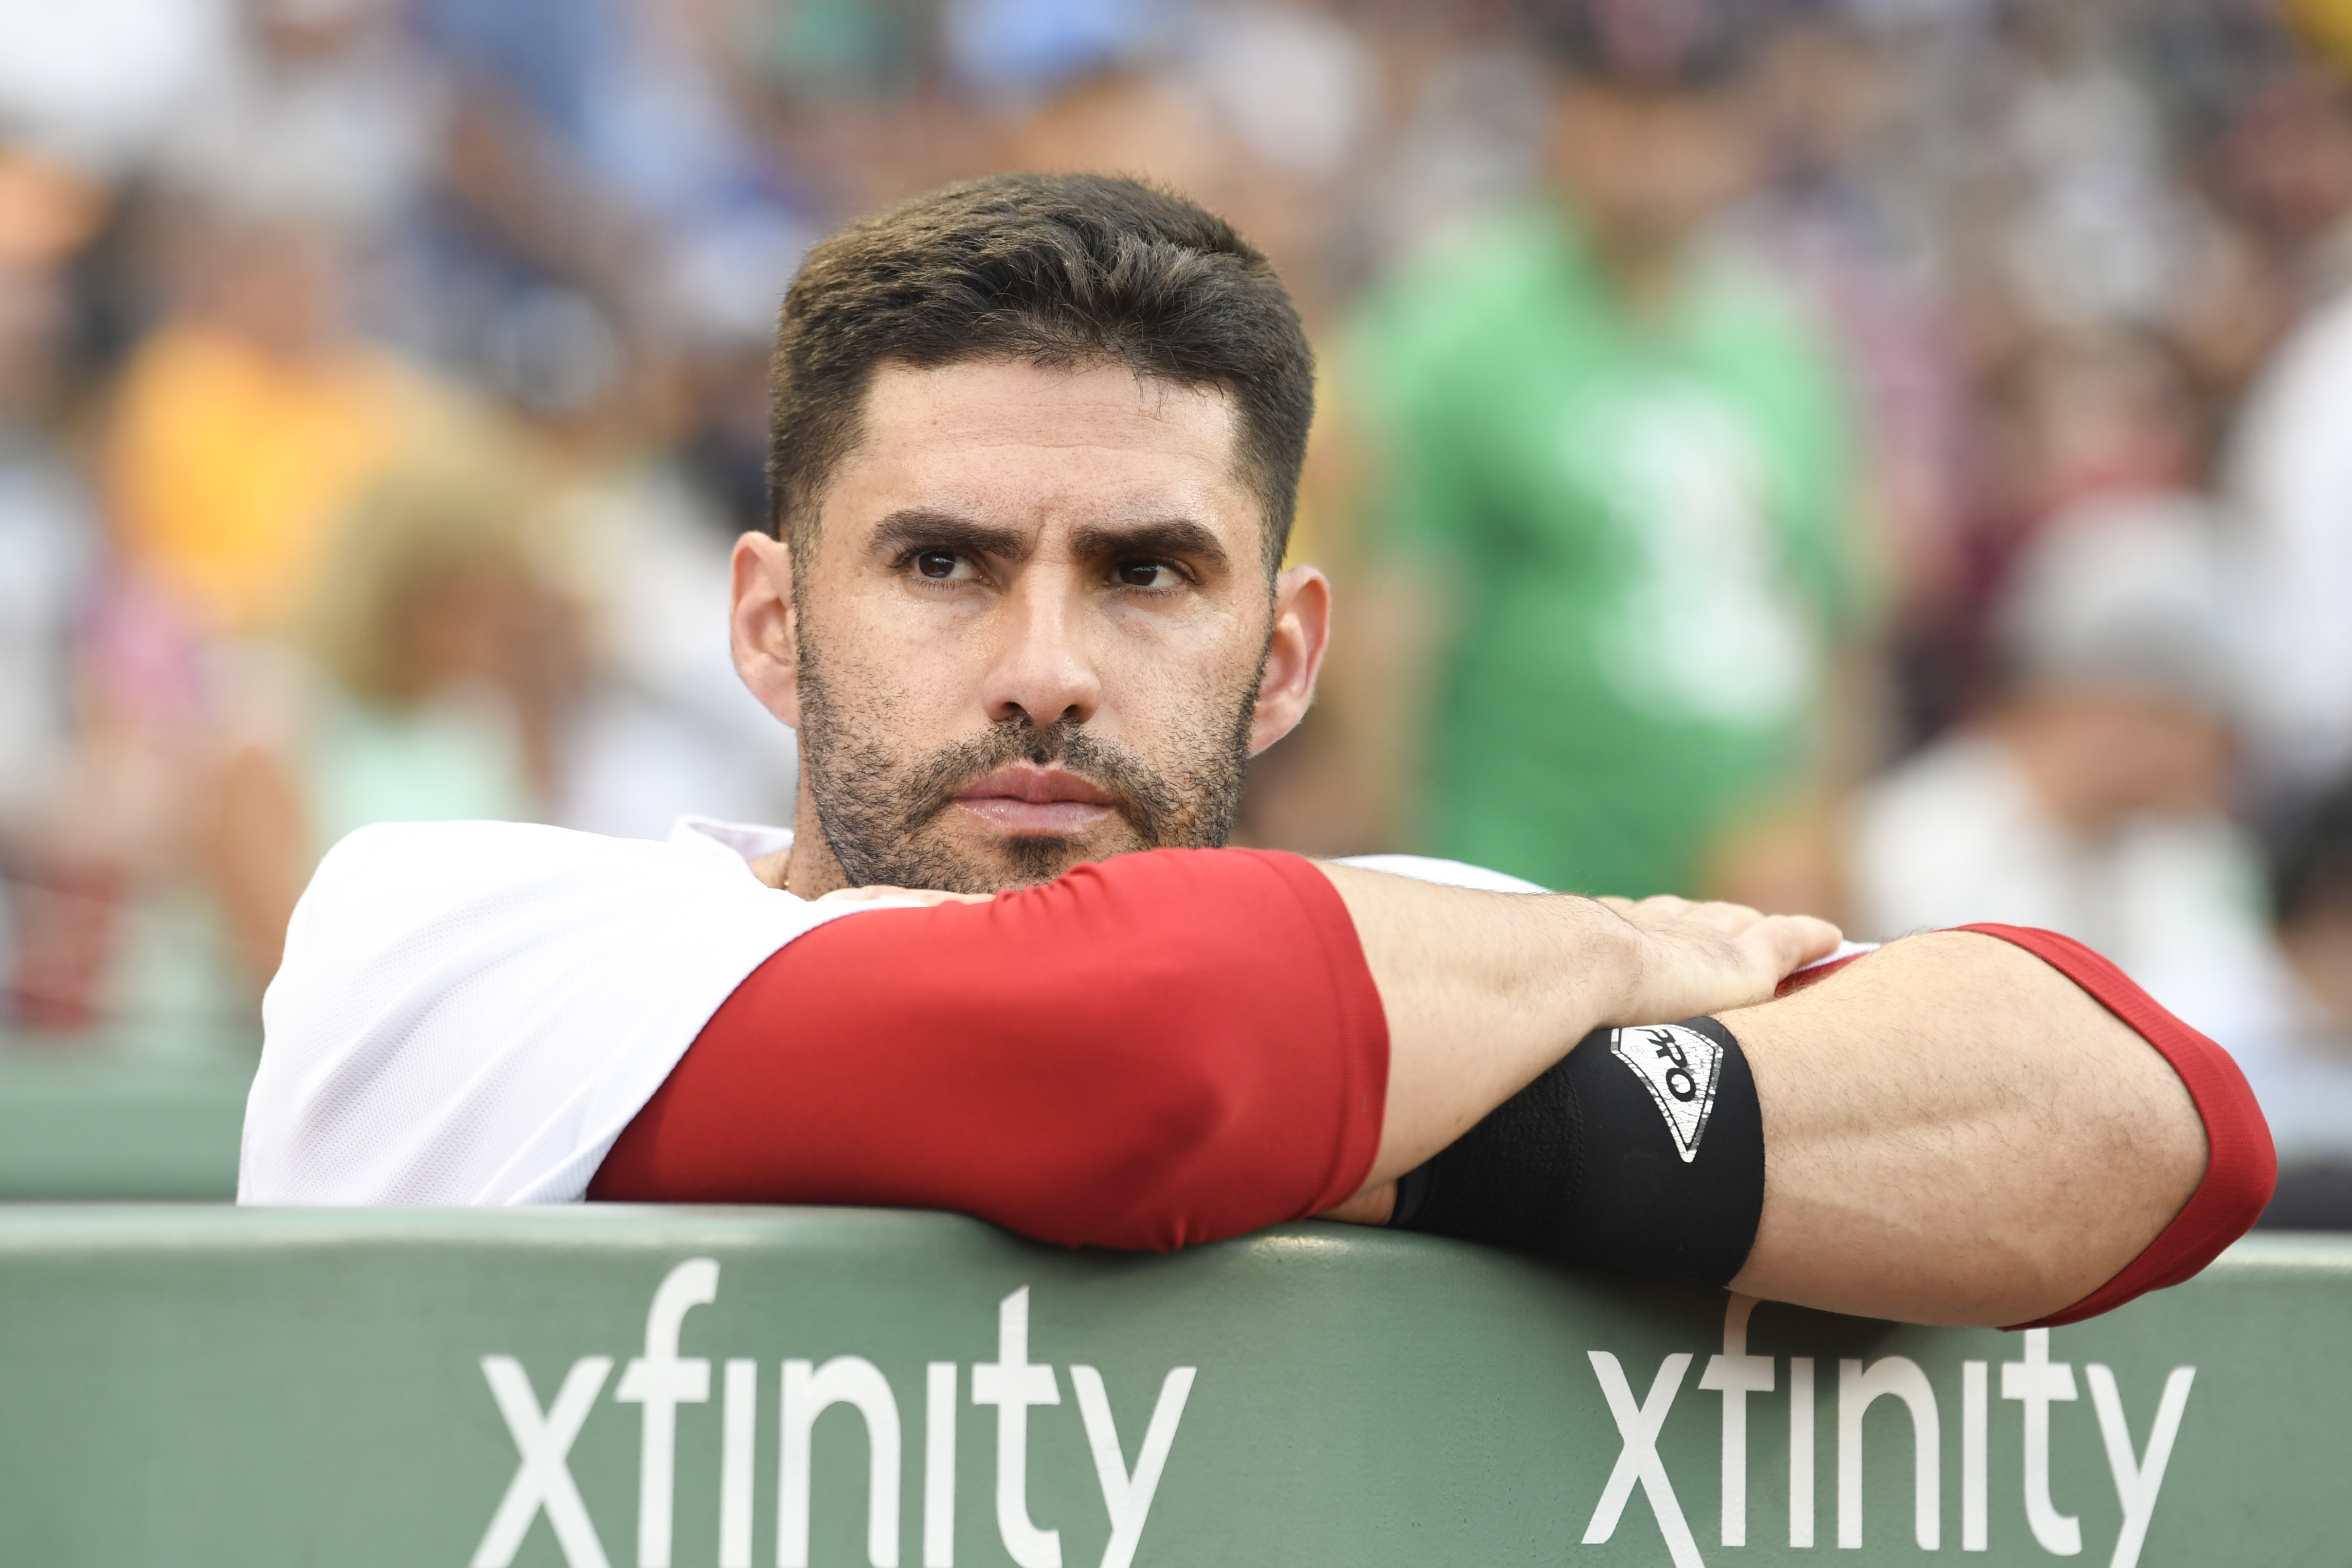 J.D. Martinez and the three Sharks who went from Nova Southeastern